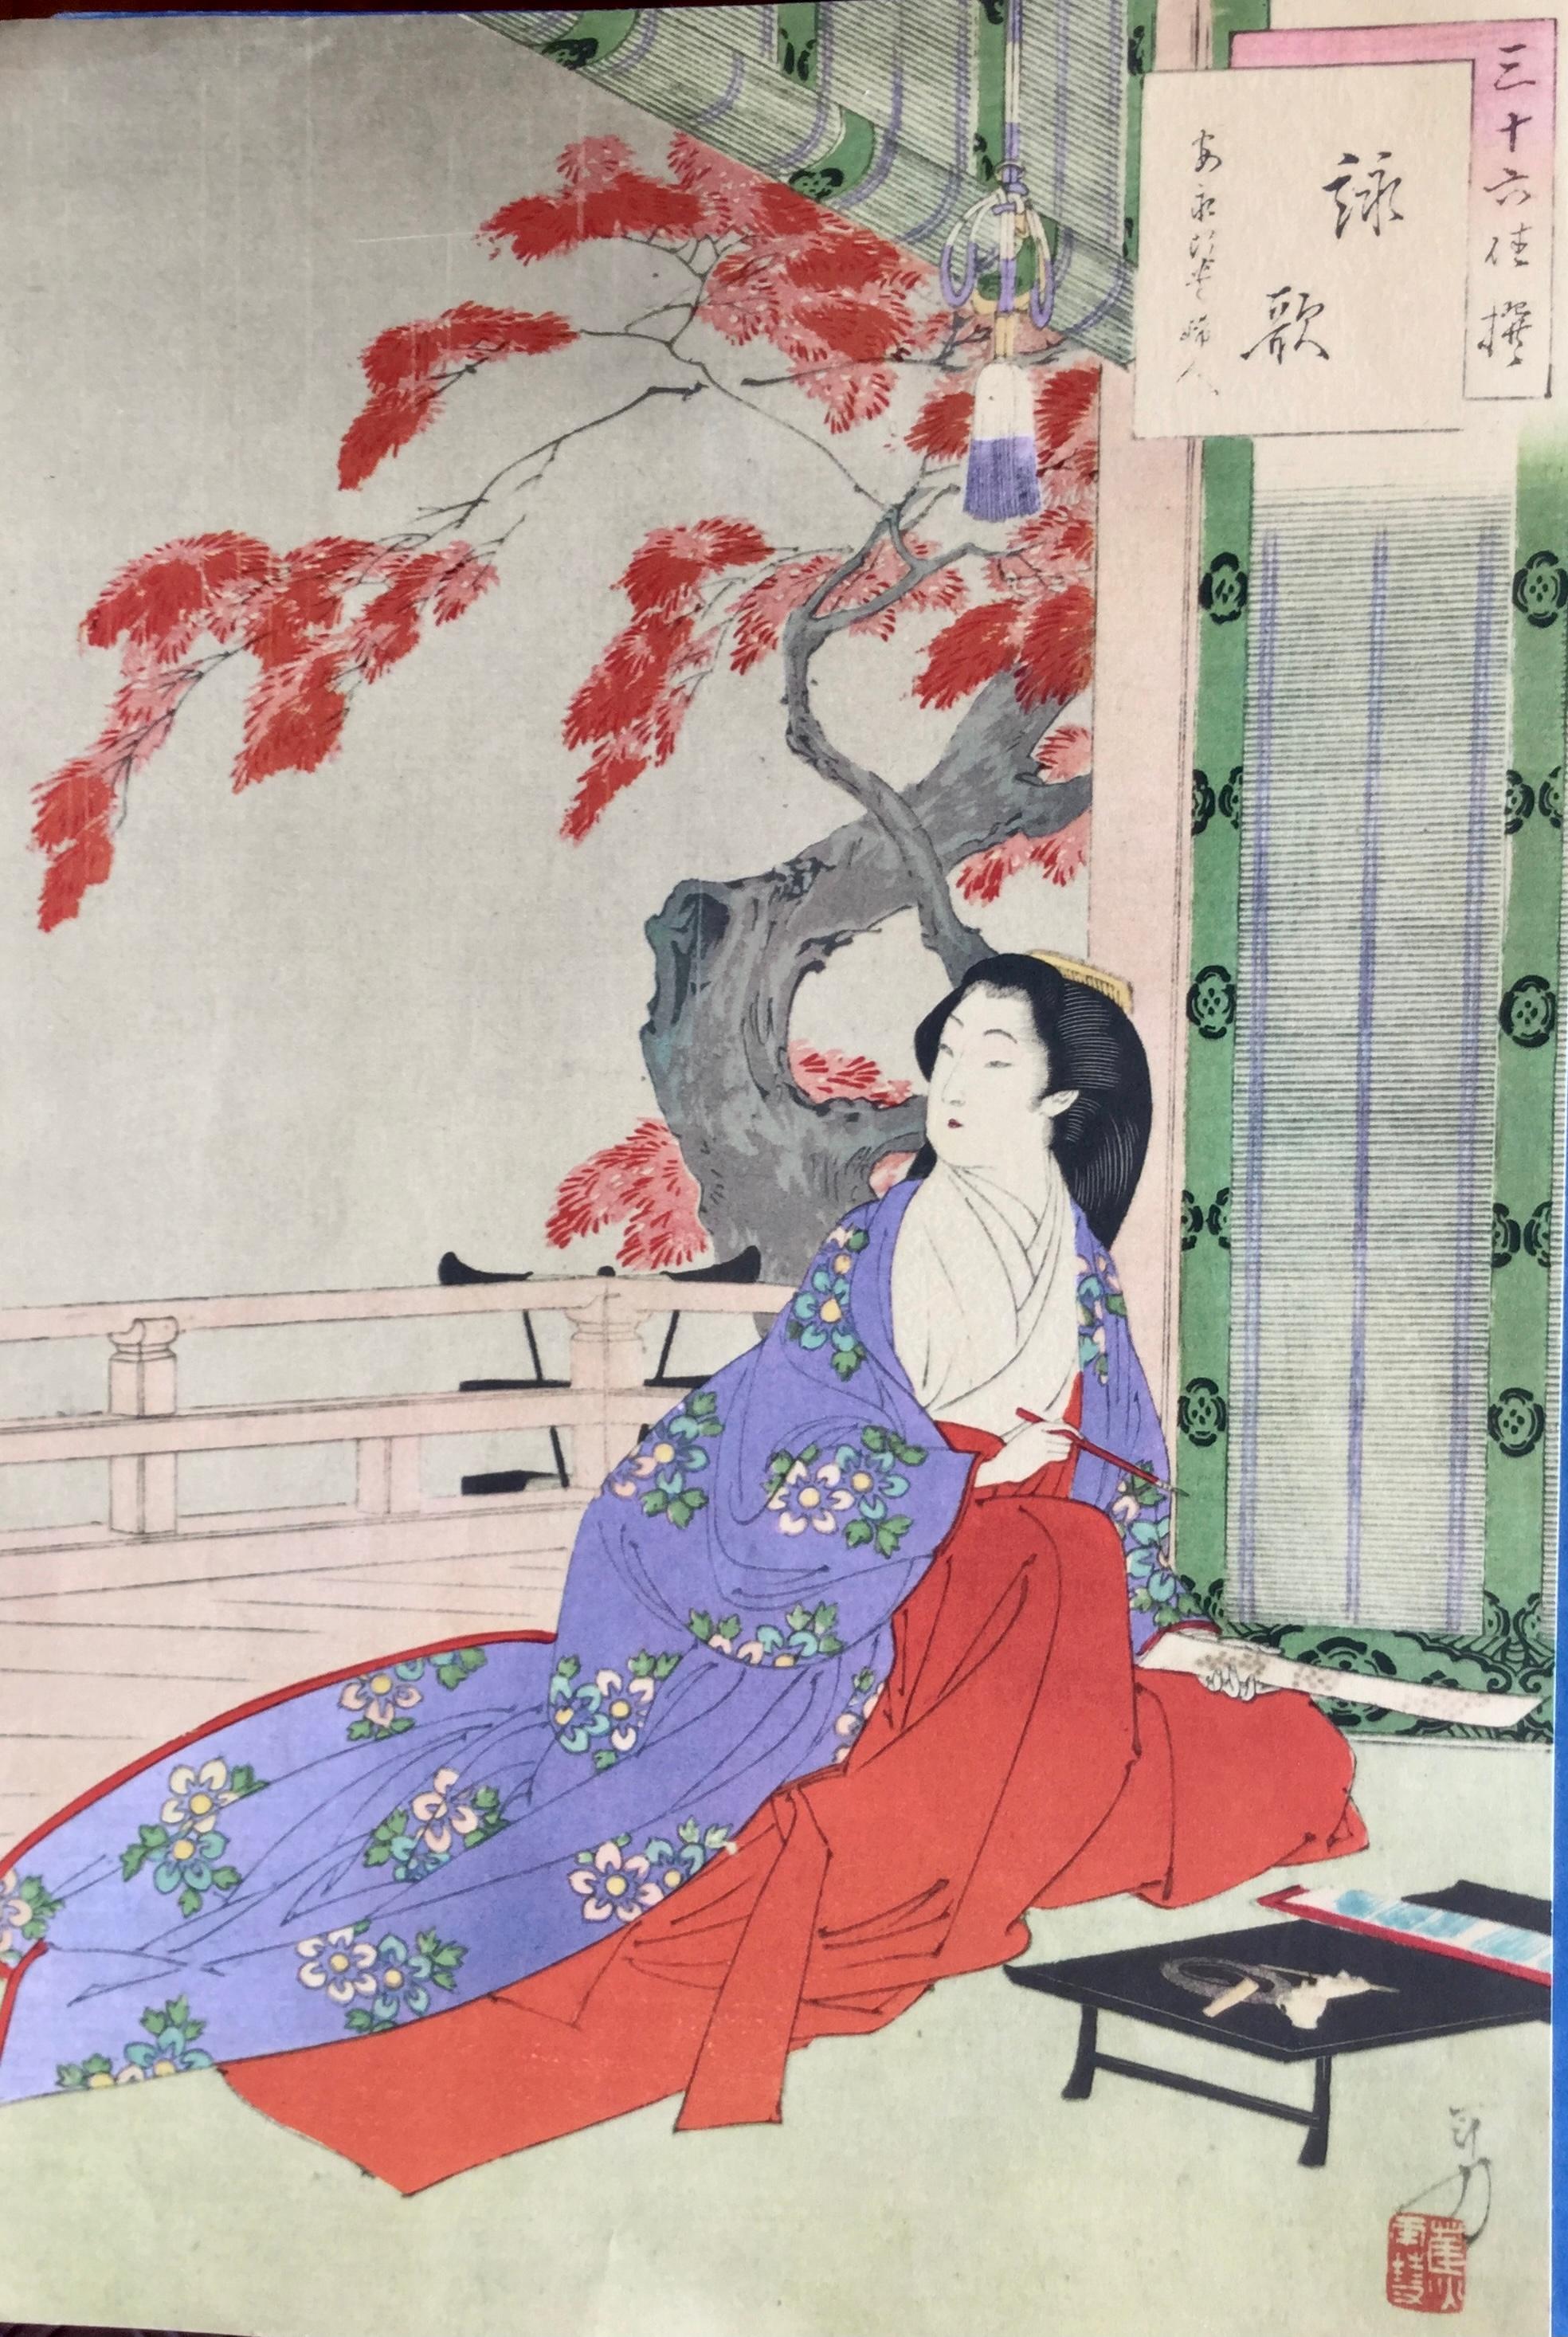 Important series of eight colorful oriental engravings featuring iconic scenes of Japanese life.
They are the work of great artists including:
Mizuno Toshikata (1866-1908) 
Utagawa Toyokuni (Japanese: ?; 1769 in Edo – 24 February 1825 in Edo)

Every